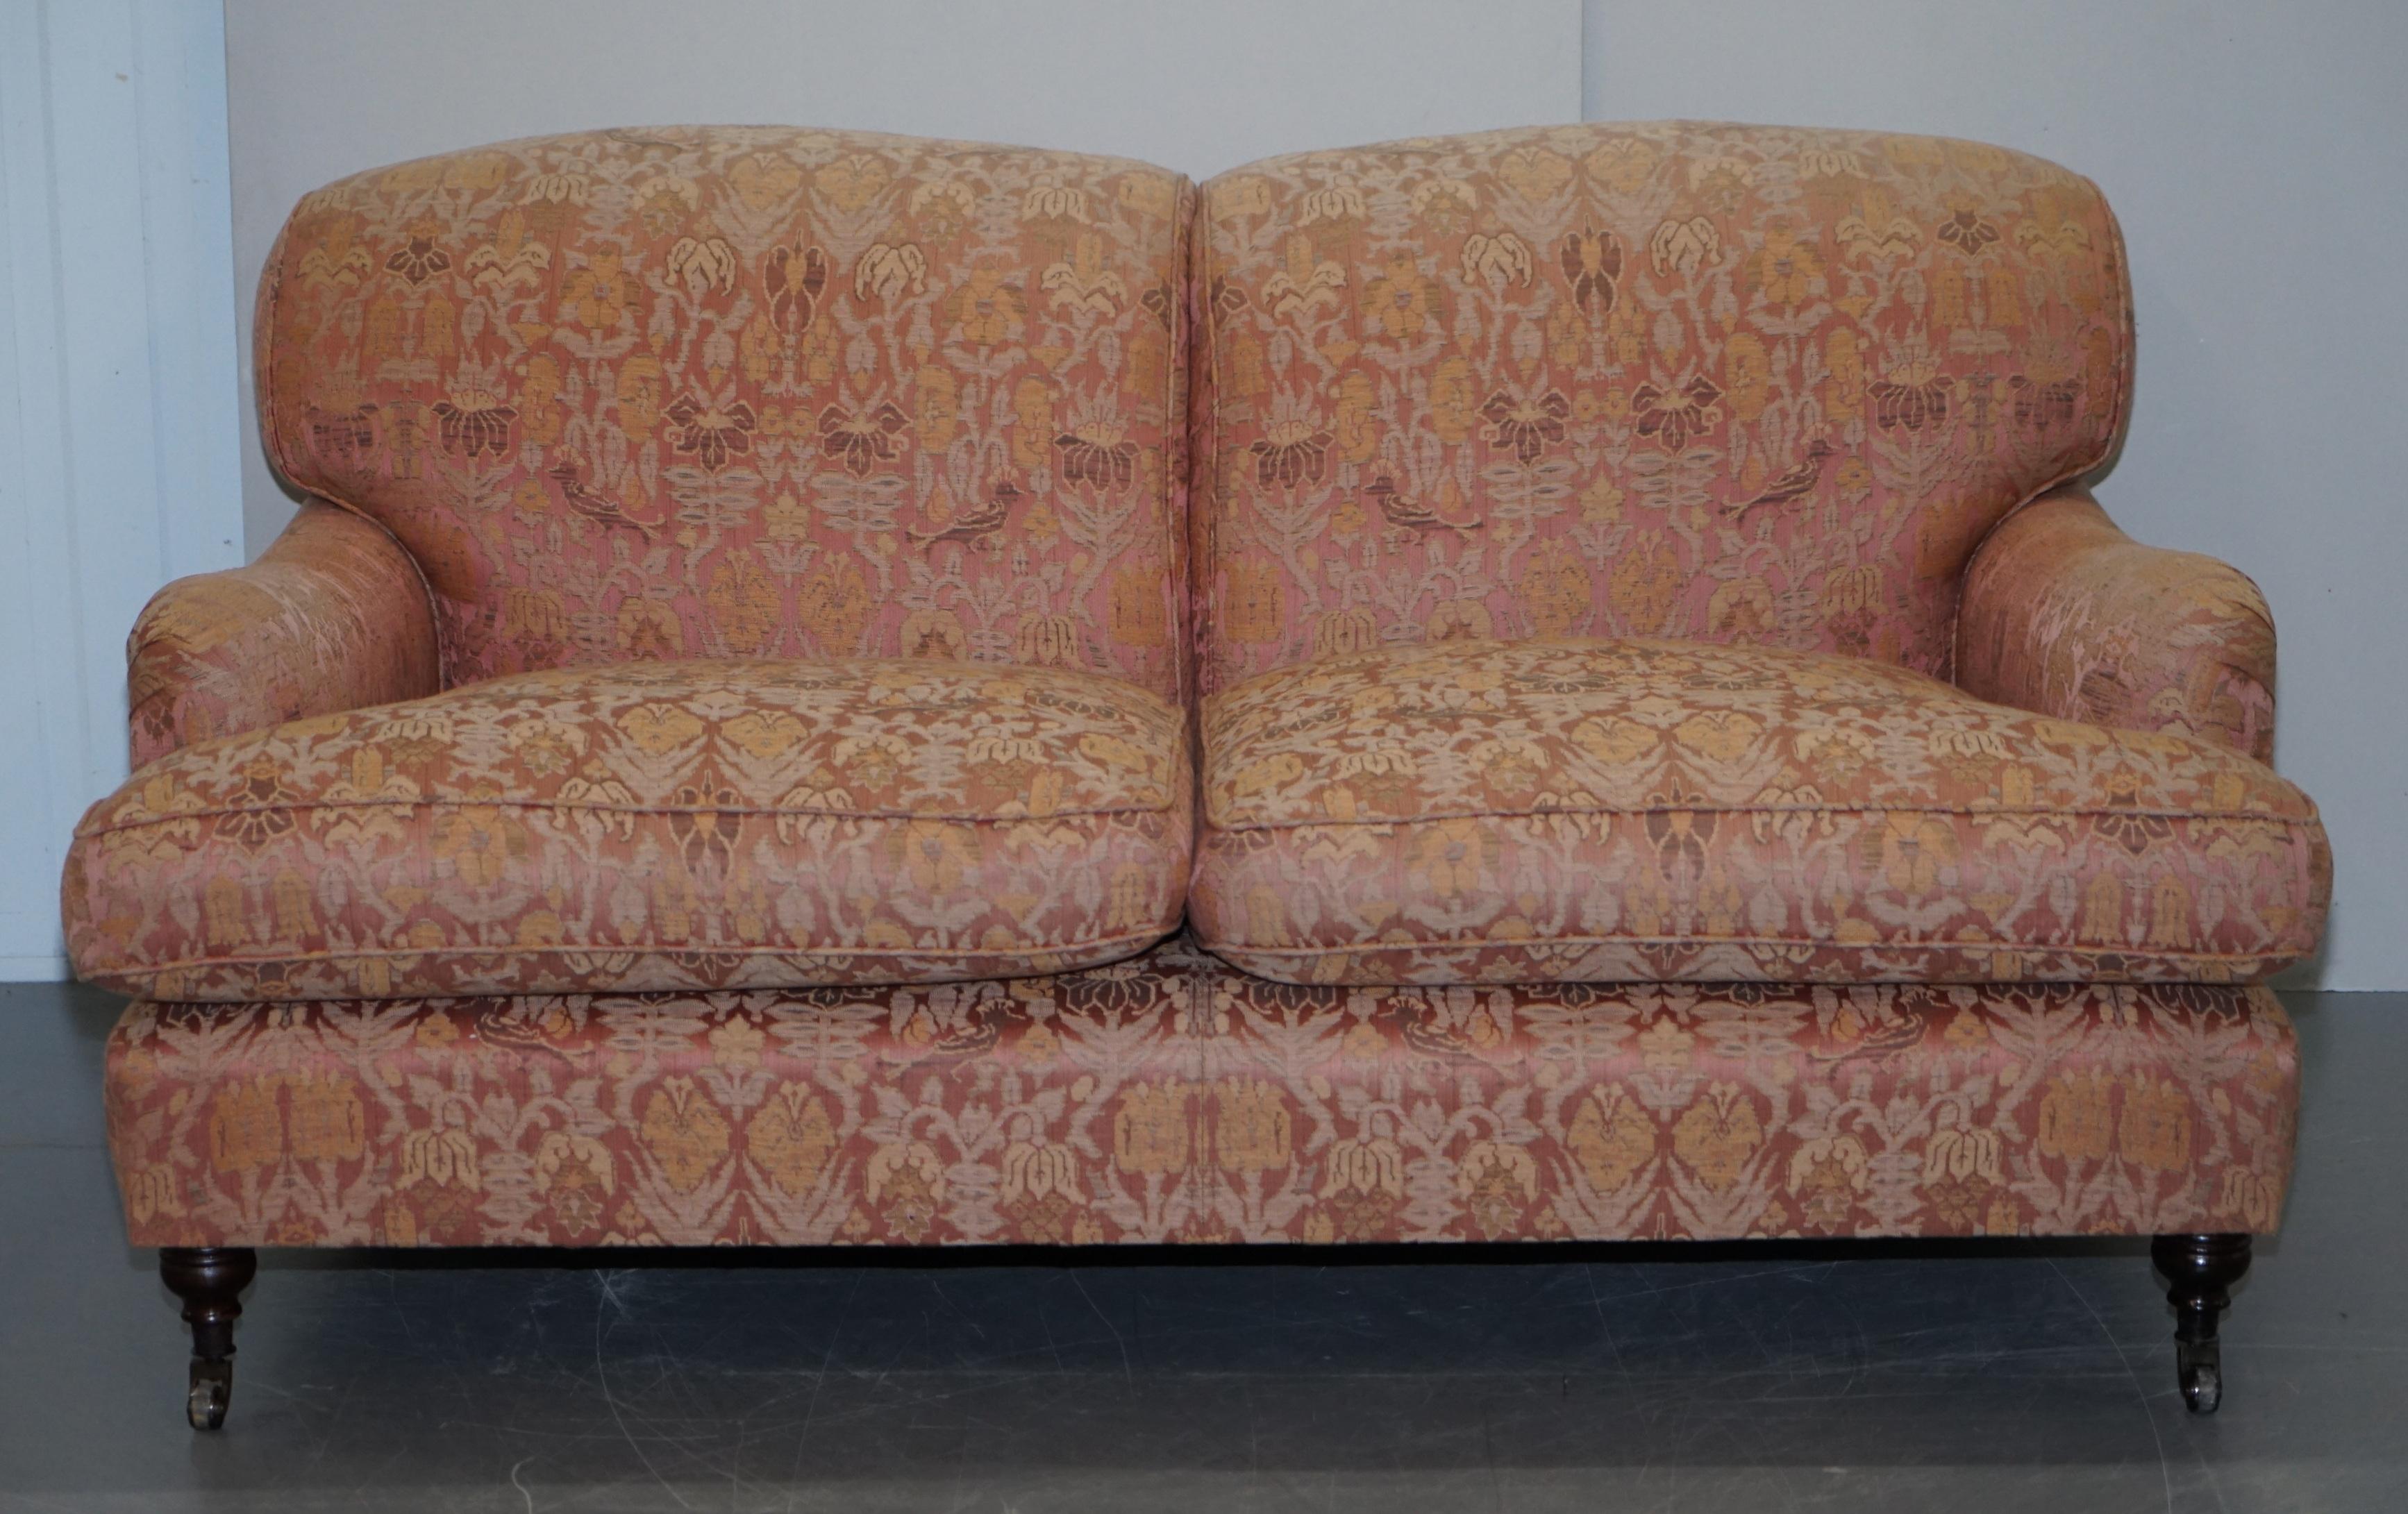 We are delighted to offer for sale this lovely George Smith signature scroll arm sofa RRP £11,000 with faded salmon pink embroidered upholstery of birds and flowers 

George Smith Chelsea make some of the finest handmade in England sofas based on